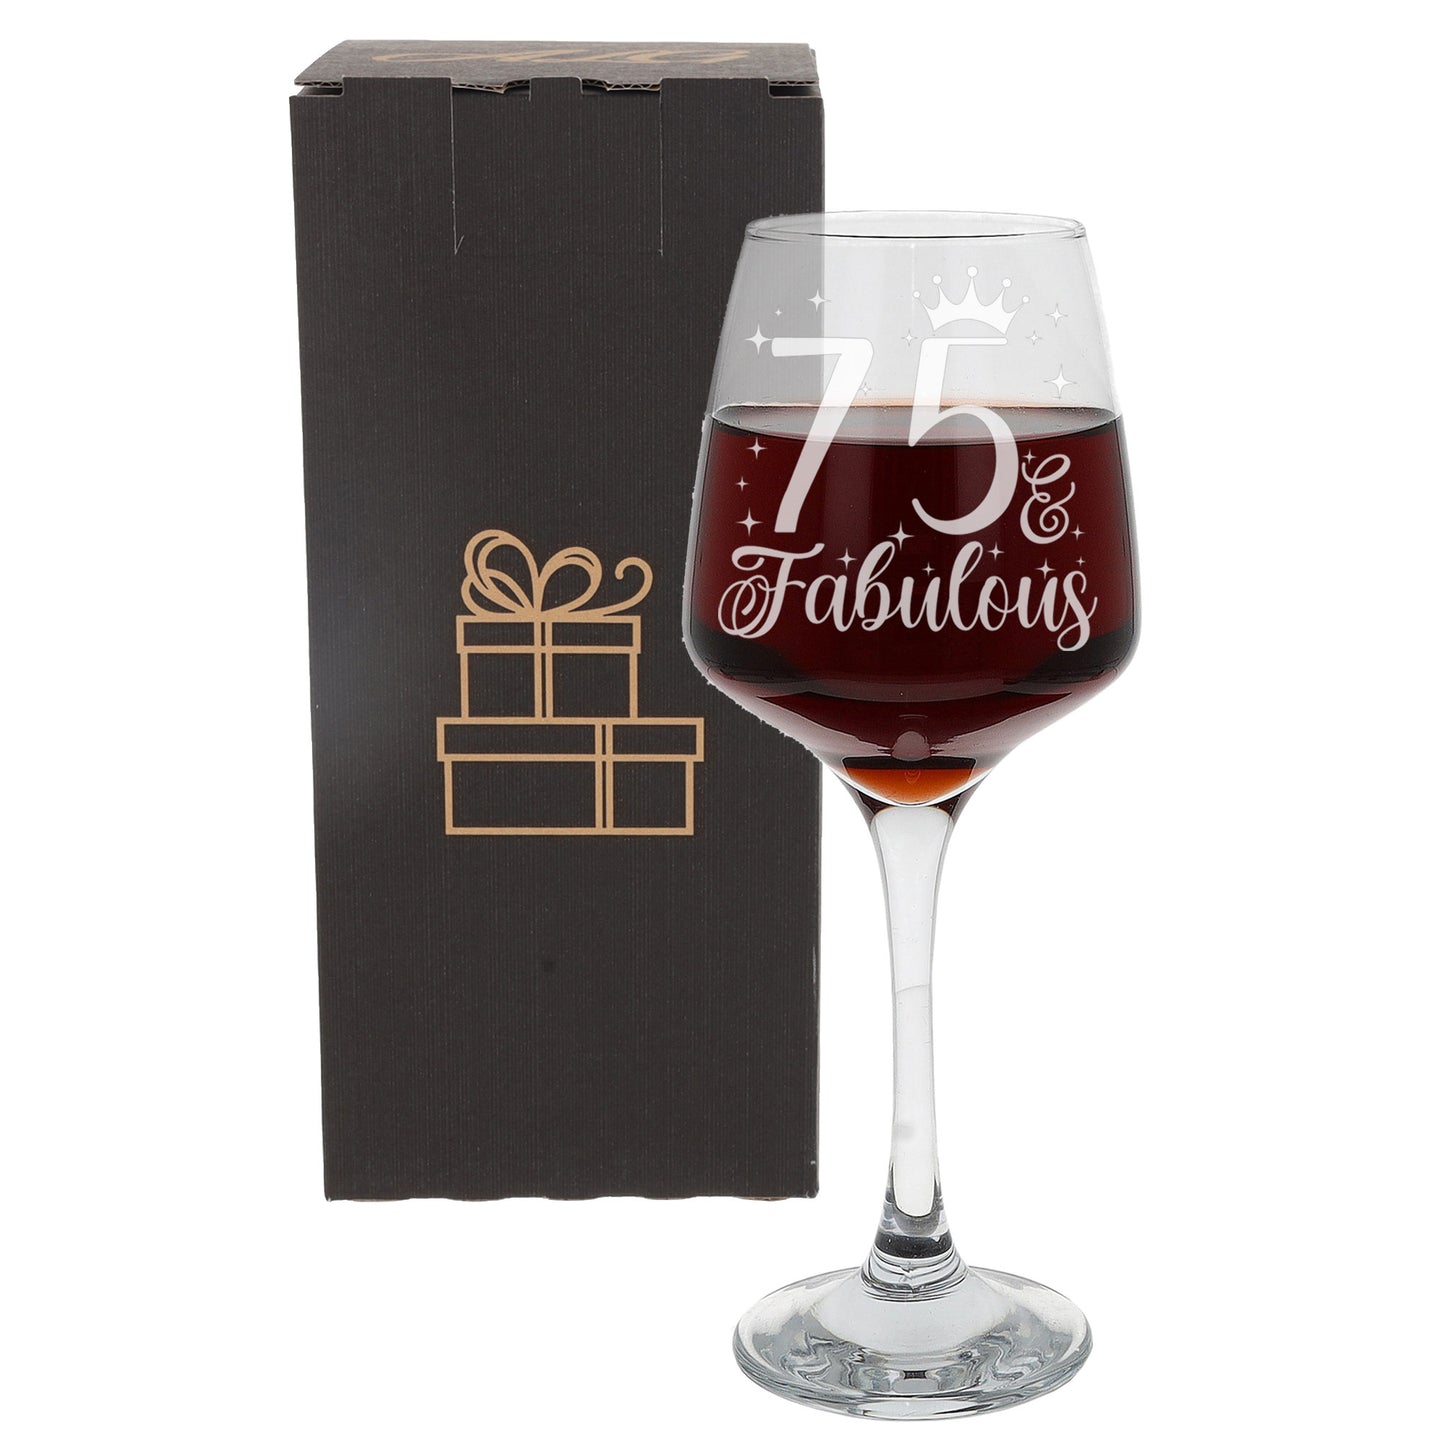 75 & Fabulous 75th Birthday Gift Engraved Wine Glass and/or Coaster Set  - Always Looking Good -   